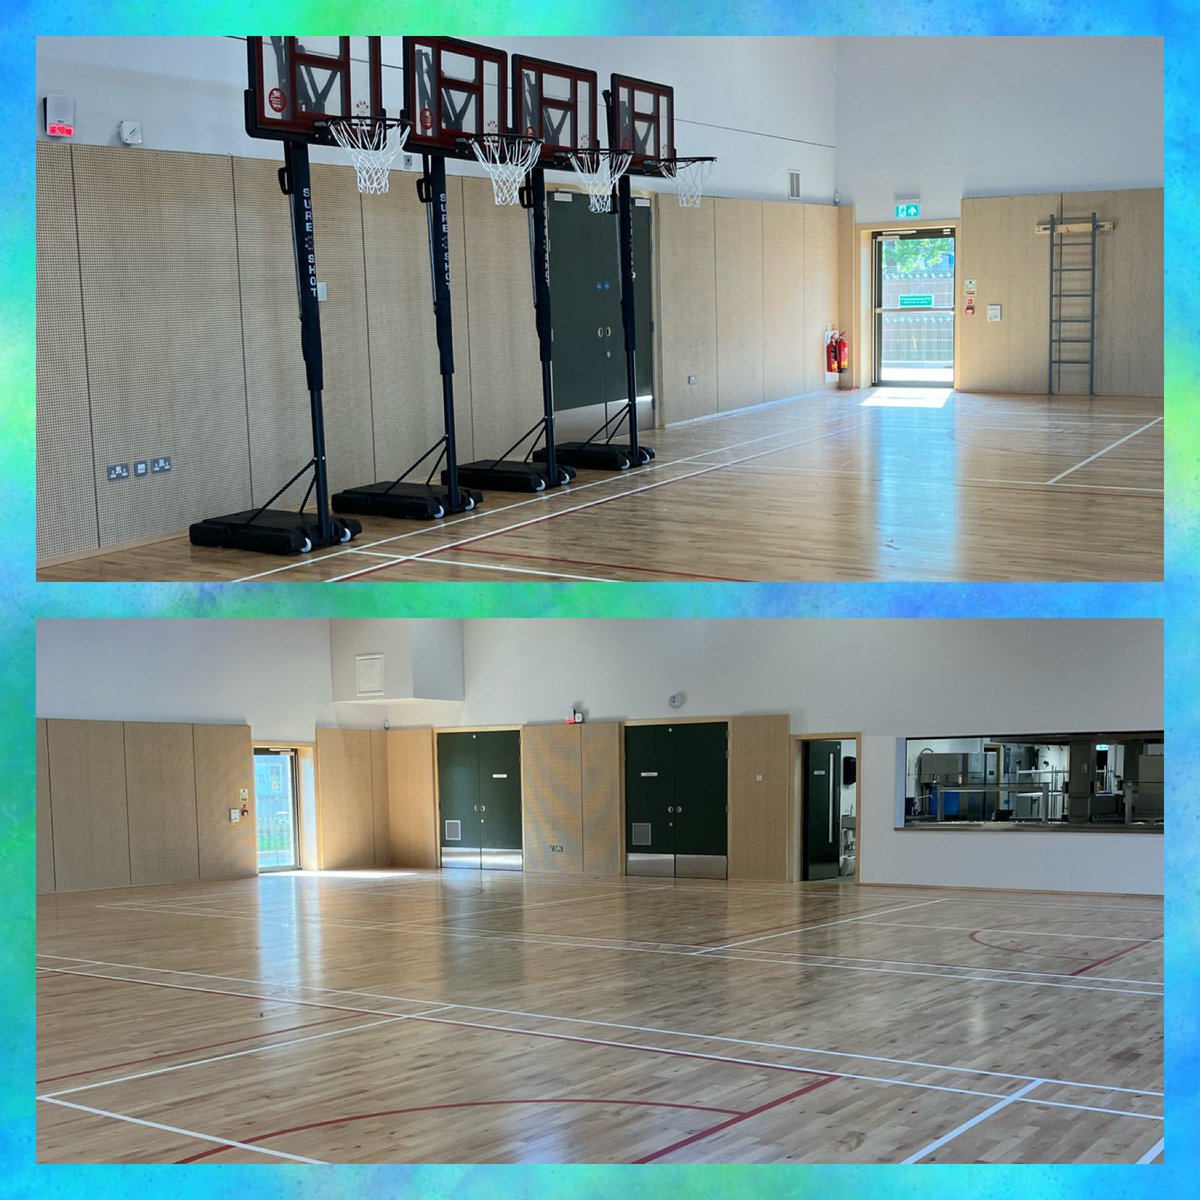 So it’s happening! We have the keys to the door! Here is a sneaky peek of our beautiful hall! Excited, to share our stunning new school on Tuesday! Our children need to be the first to see it in its full spectacular glory! 💚#Passivhaus #ImprovingOutcomes #TogetherWeGrow